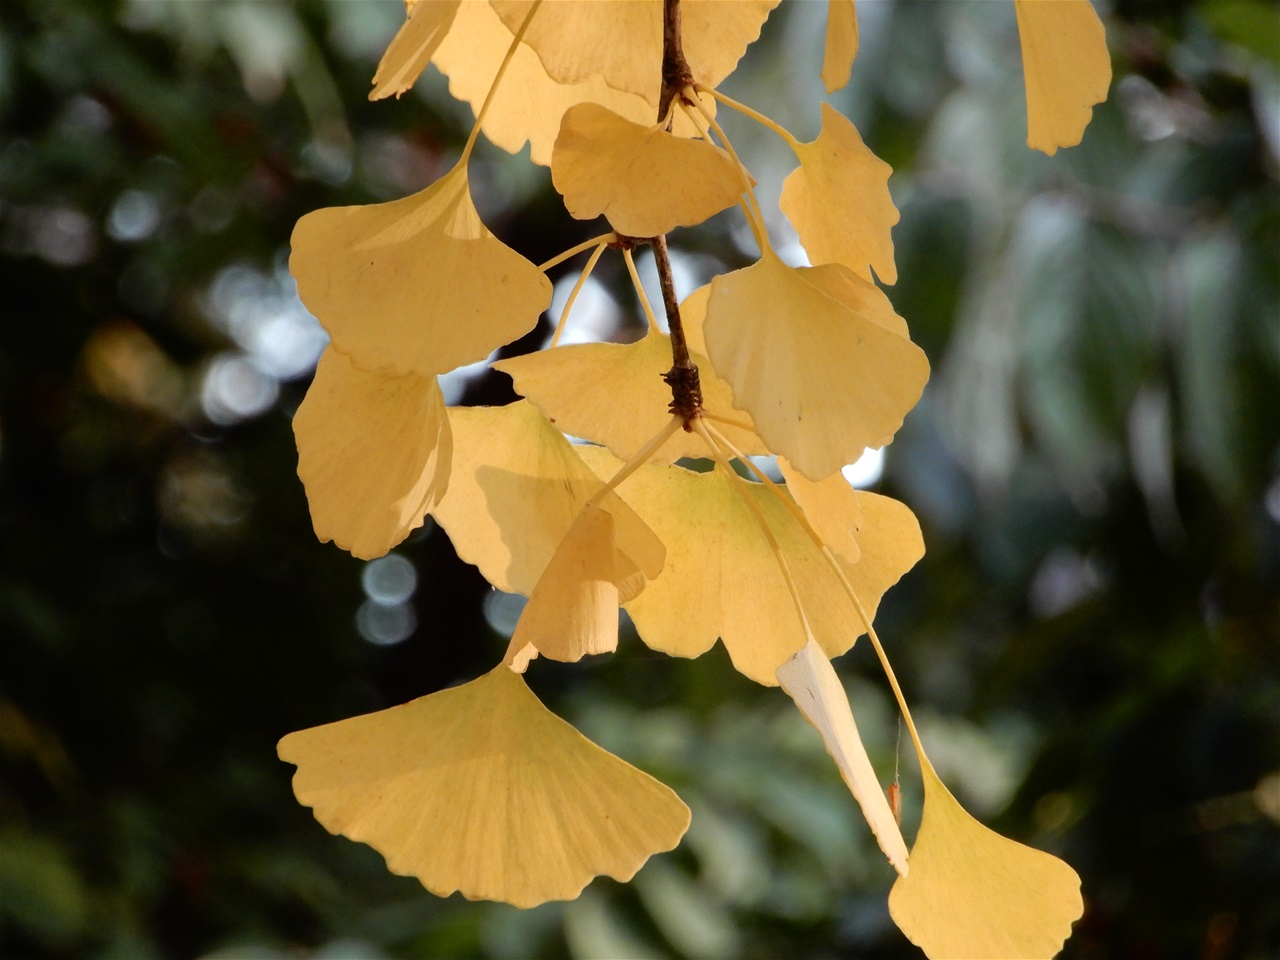 Gingko tree, could be the symbol of the city.